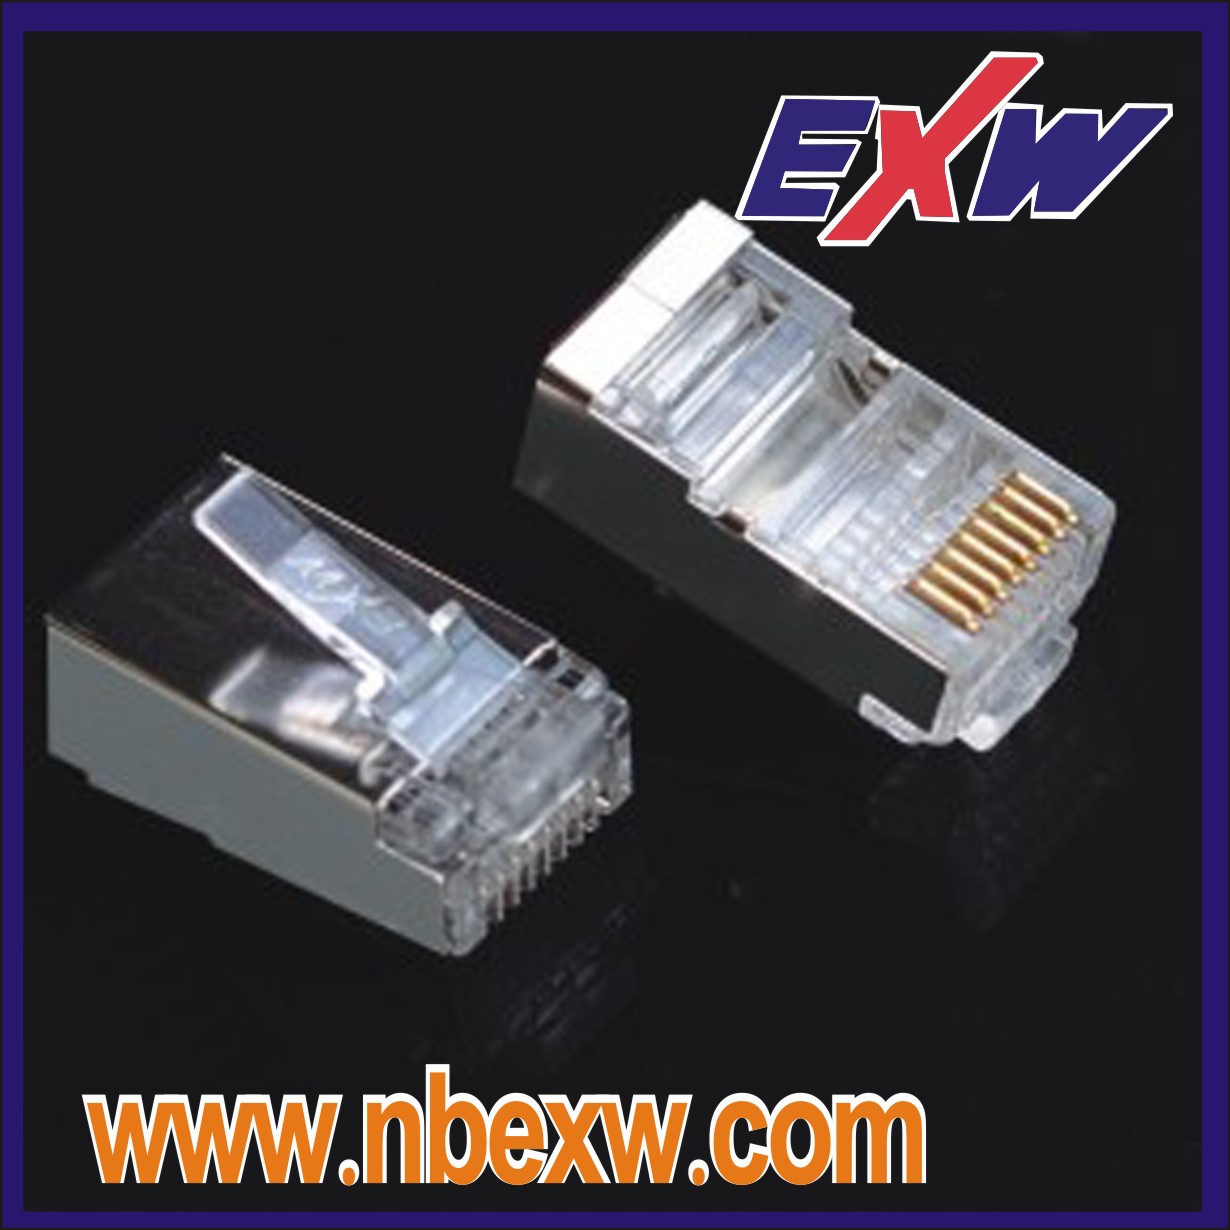 Metal RJ45 Connector for Cat5e